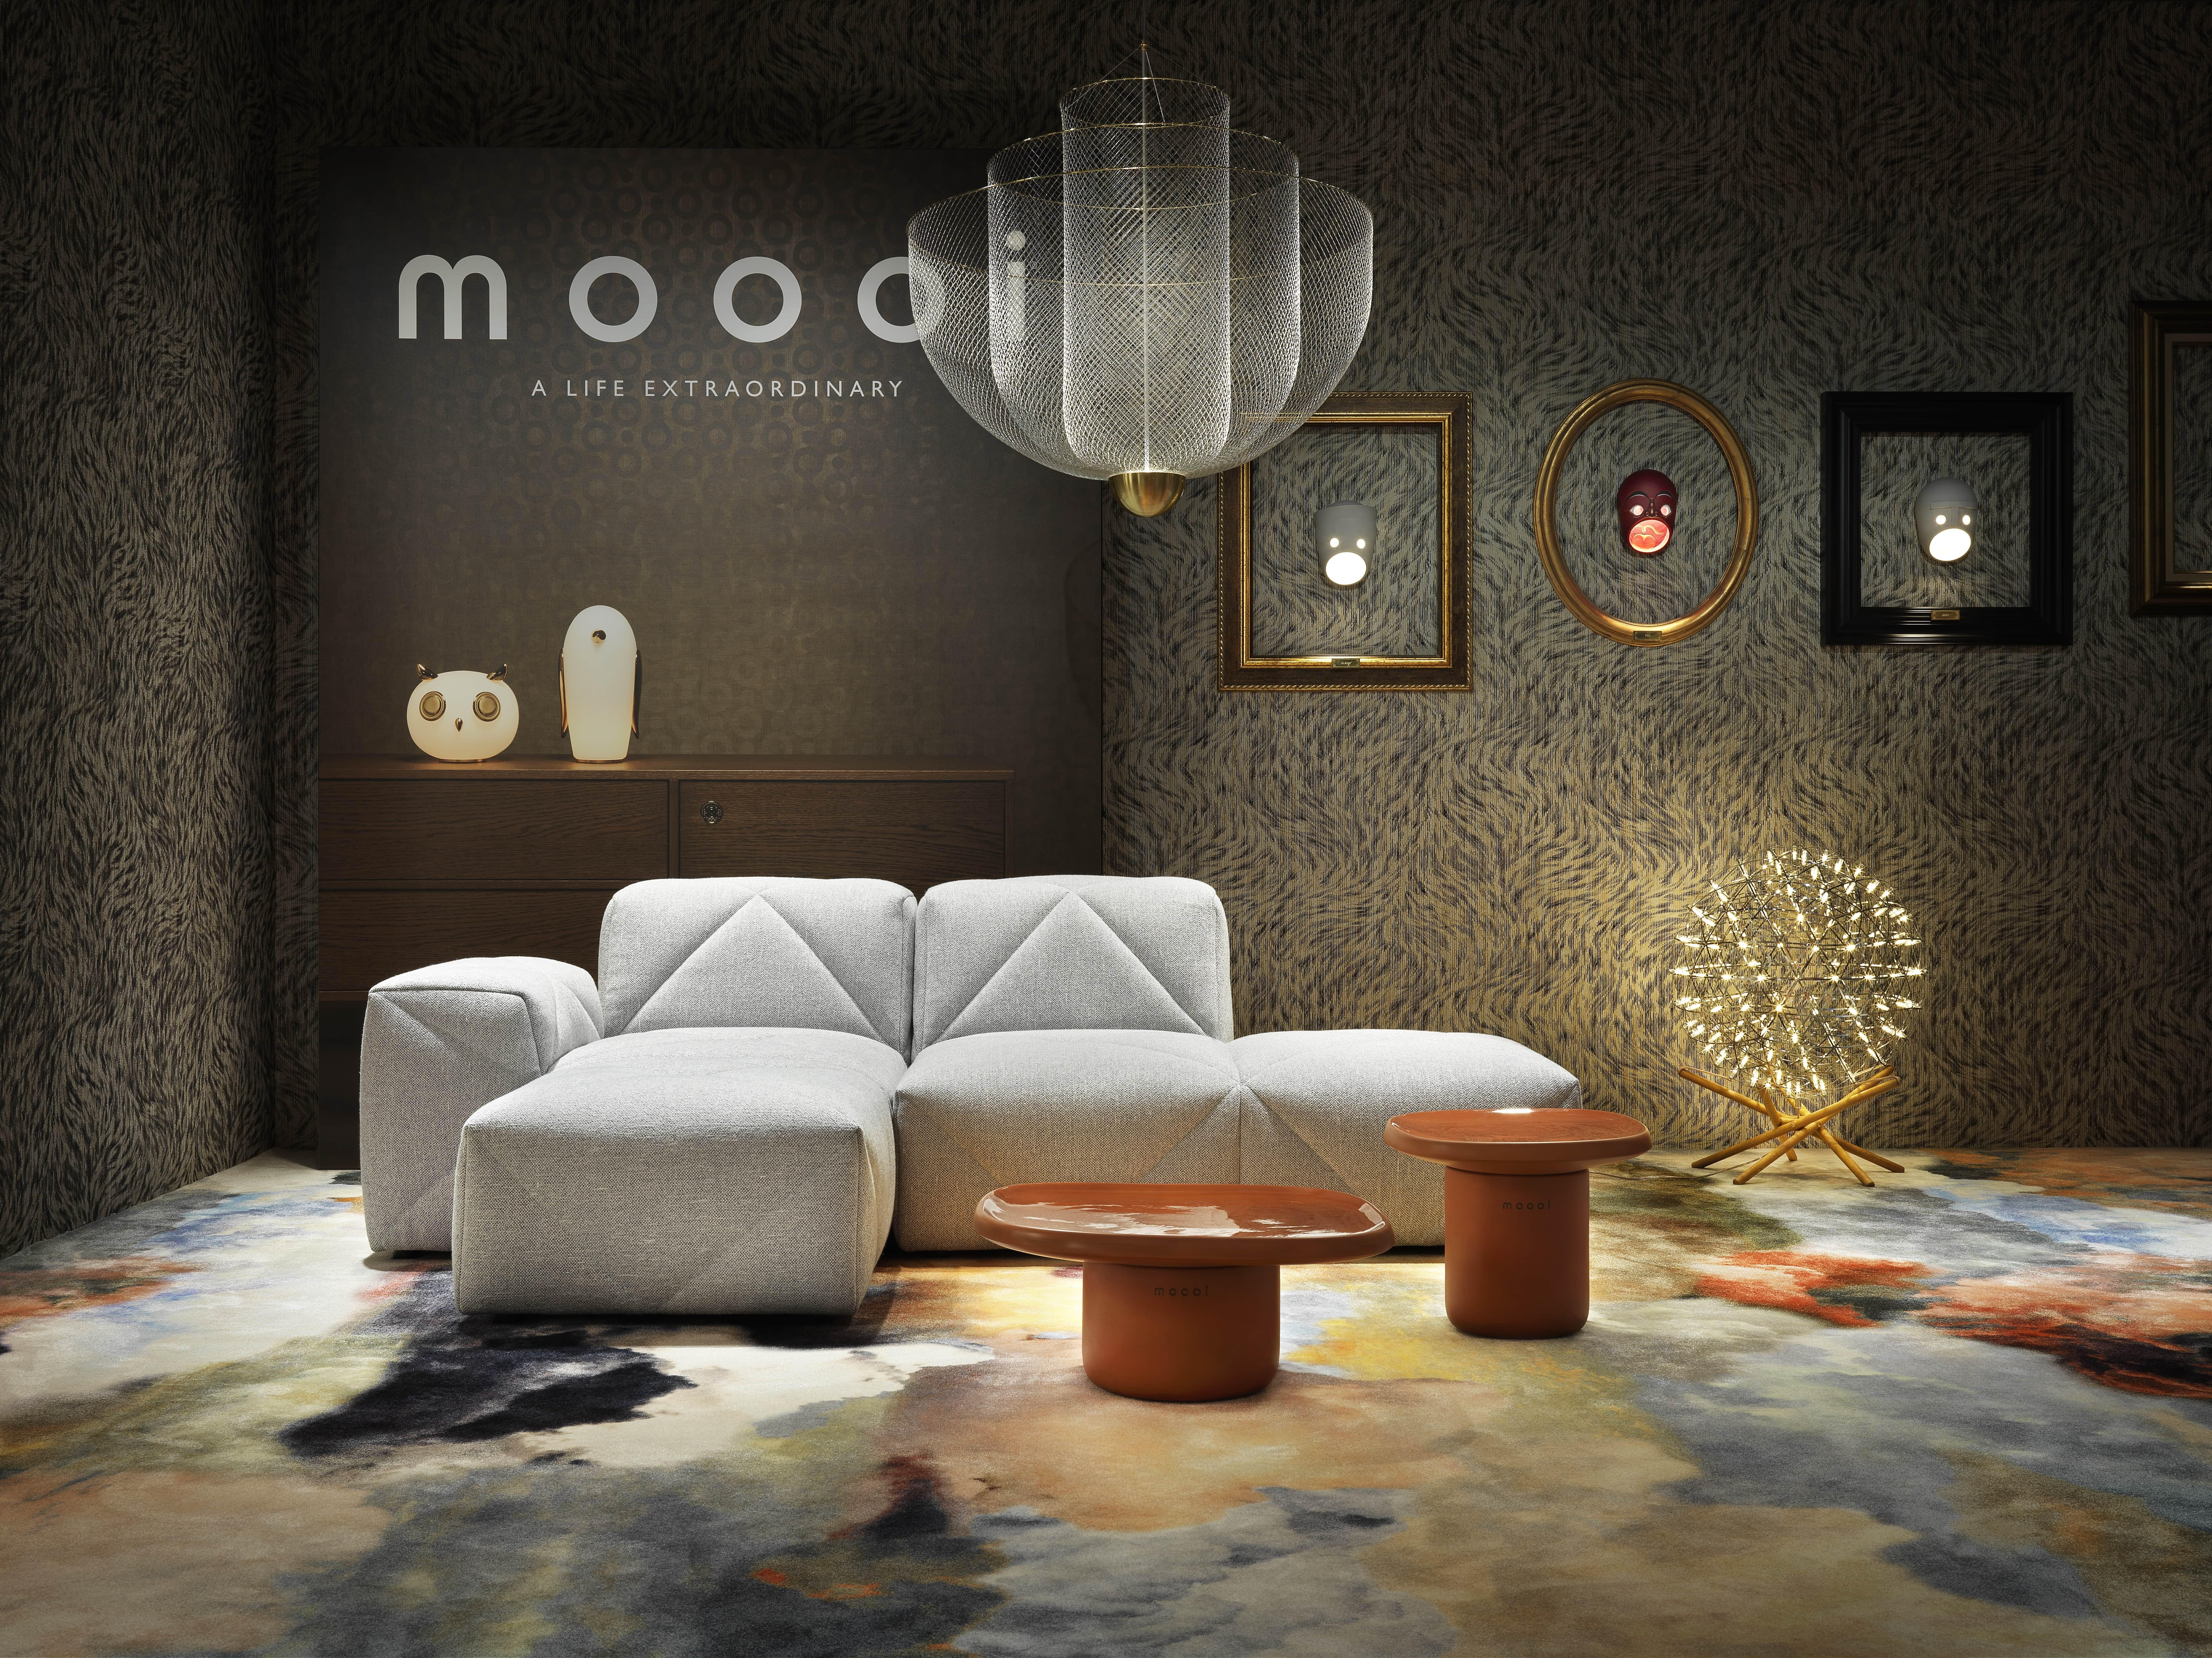 Moooi Small Maze Miami Rectangle rug rug in Wool with Blind Hem Finish by Note

Note is a Stockholm based multi disciplinary design studio, founded in 2008. They collaborate intensely with passion, to share their insights with the world.